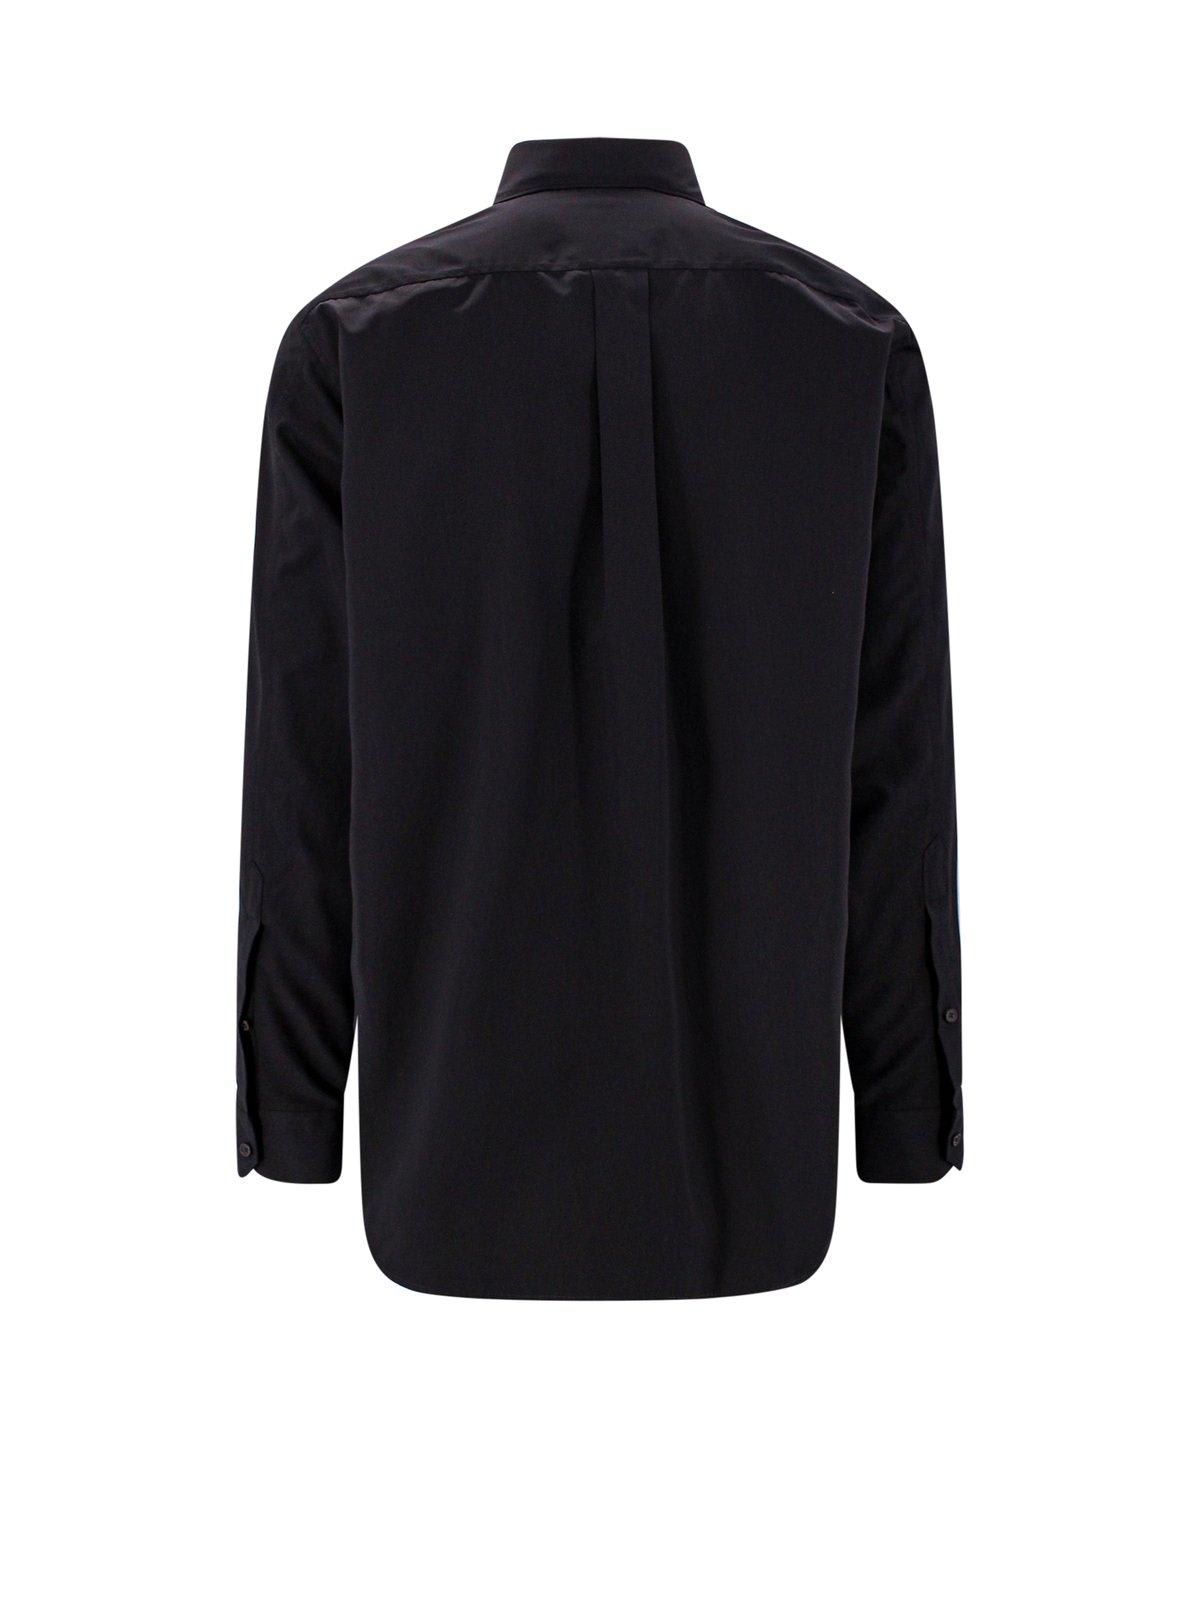 Shop Valentino Logo Embroidered Long-sleeved Shirt In Black